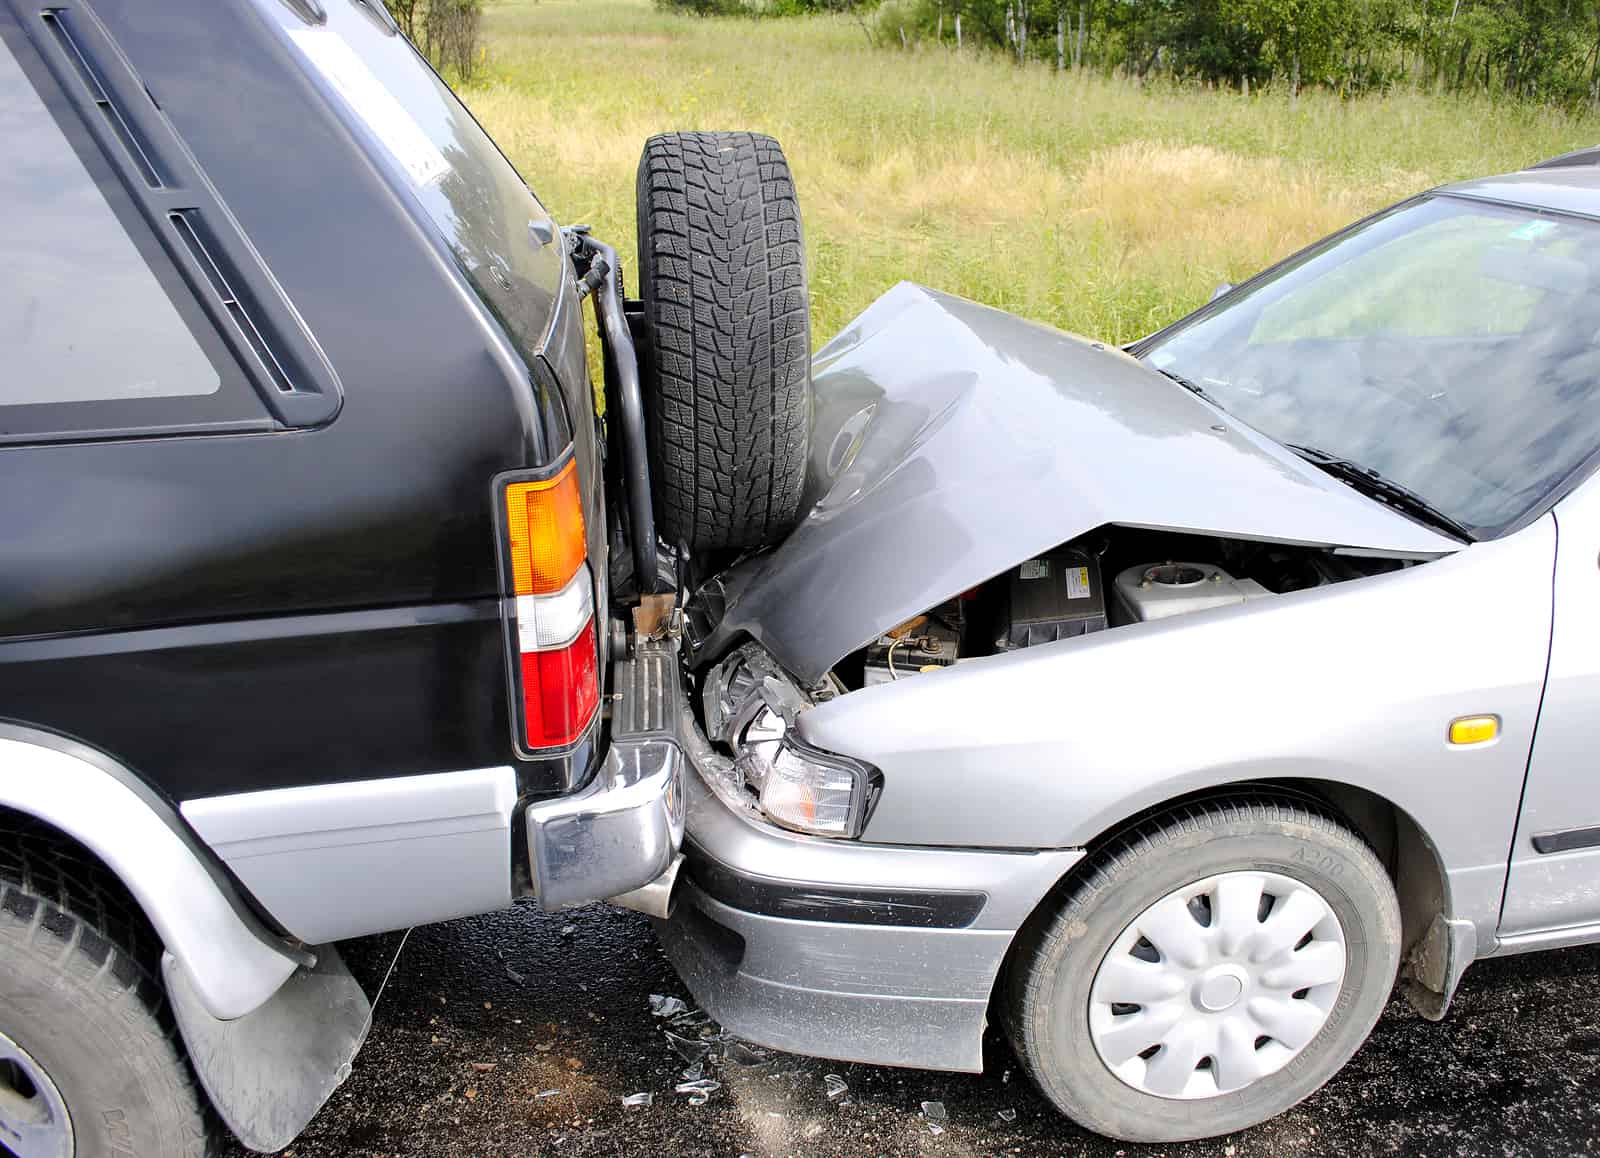 How Do I Know Who is At Fault in a Car Accident?